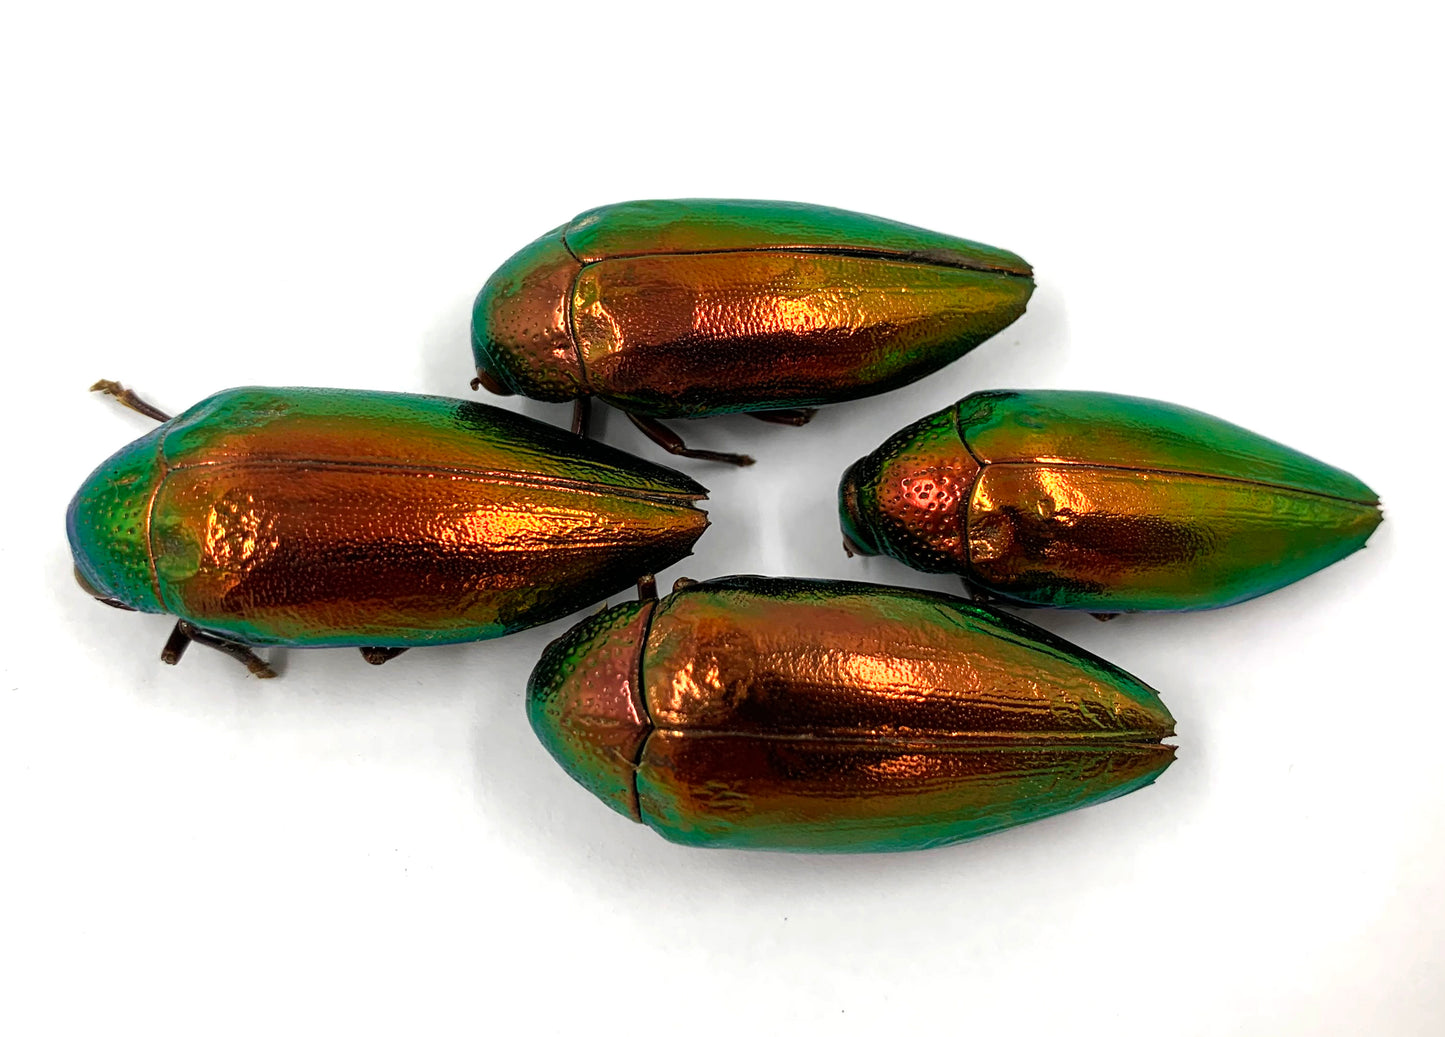 Jewel Beetle Taxidermy Elytra Natural WHOLE Beetles (RED 5)